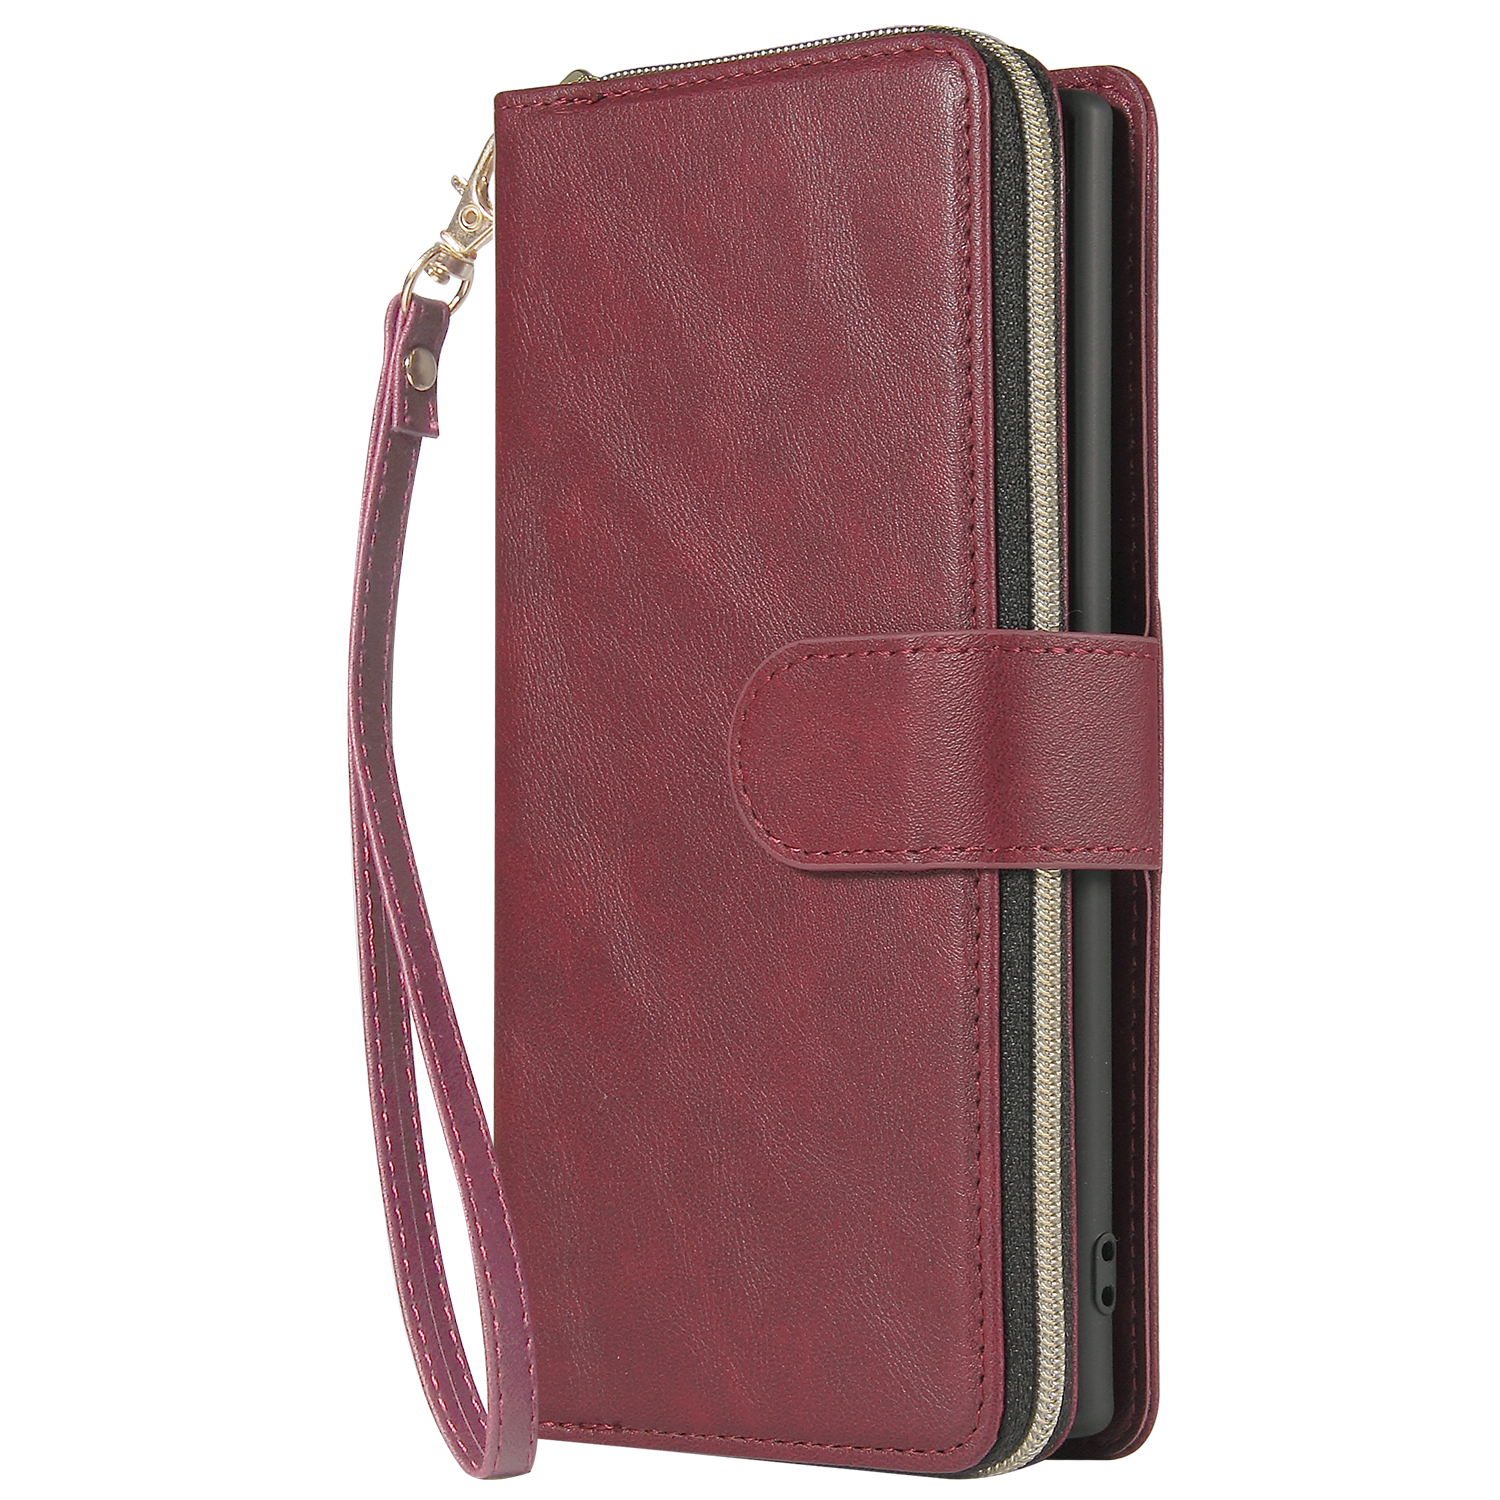 For Samsung A51 5G/A71 5G/Note 10 pro Pu Leather  Mobile Phone Cover Zipper Card Bag + Wrist Strap Red wine